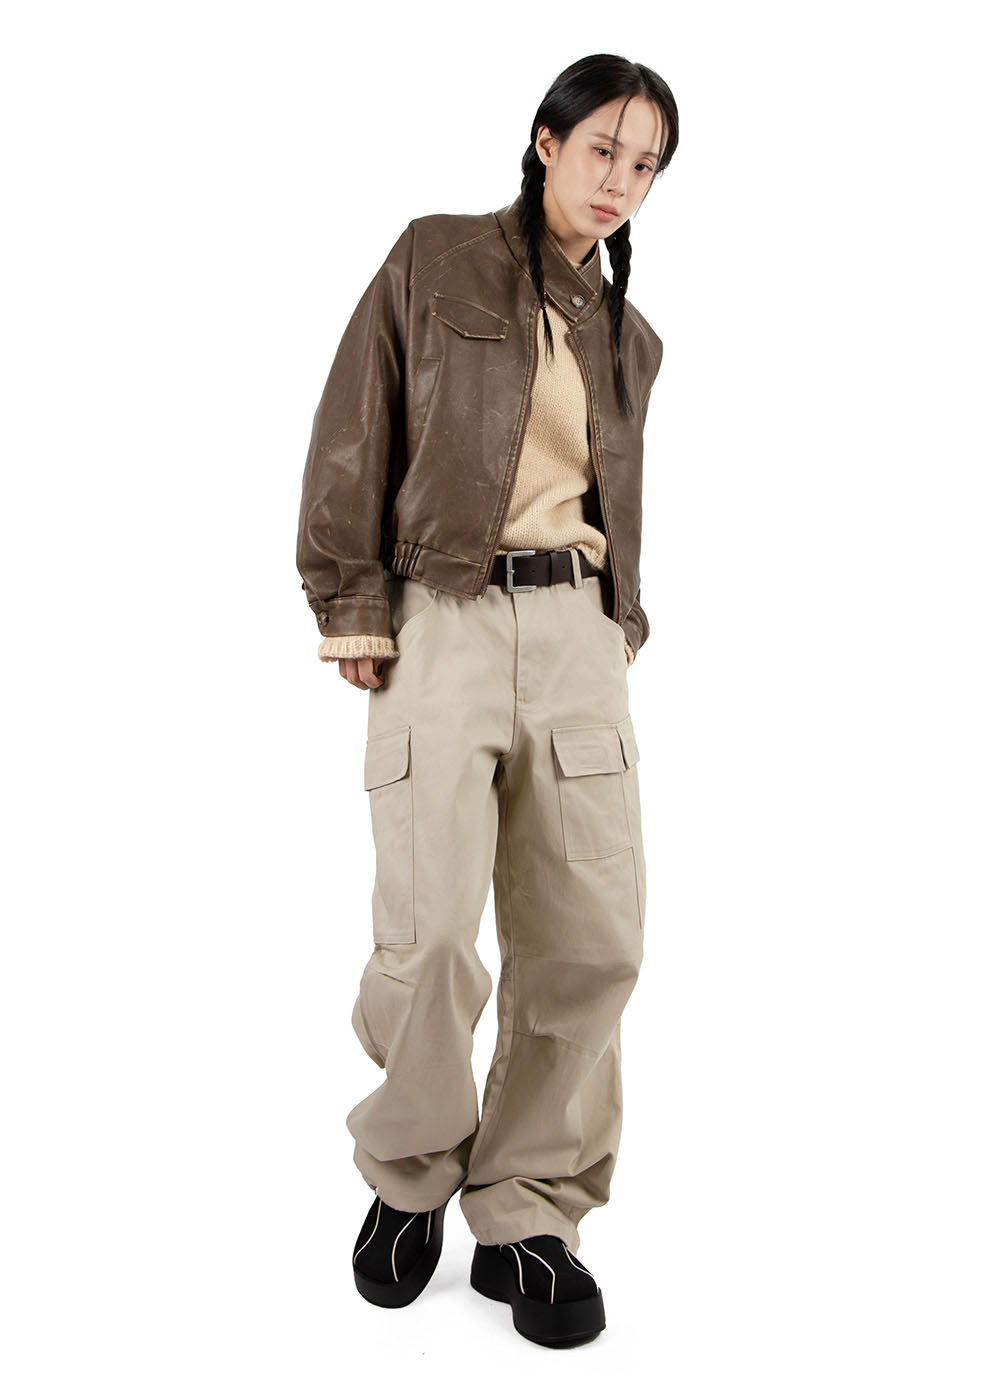 POTER CARGO TROUSER*열흘 소요*